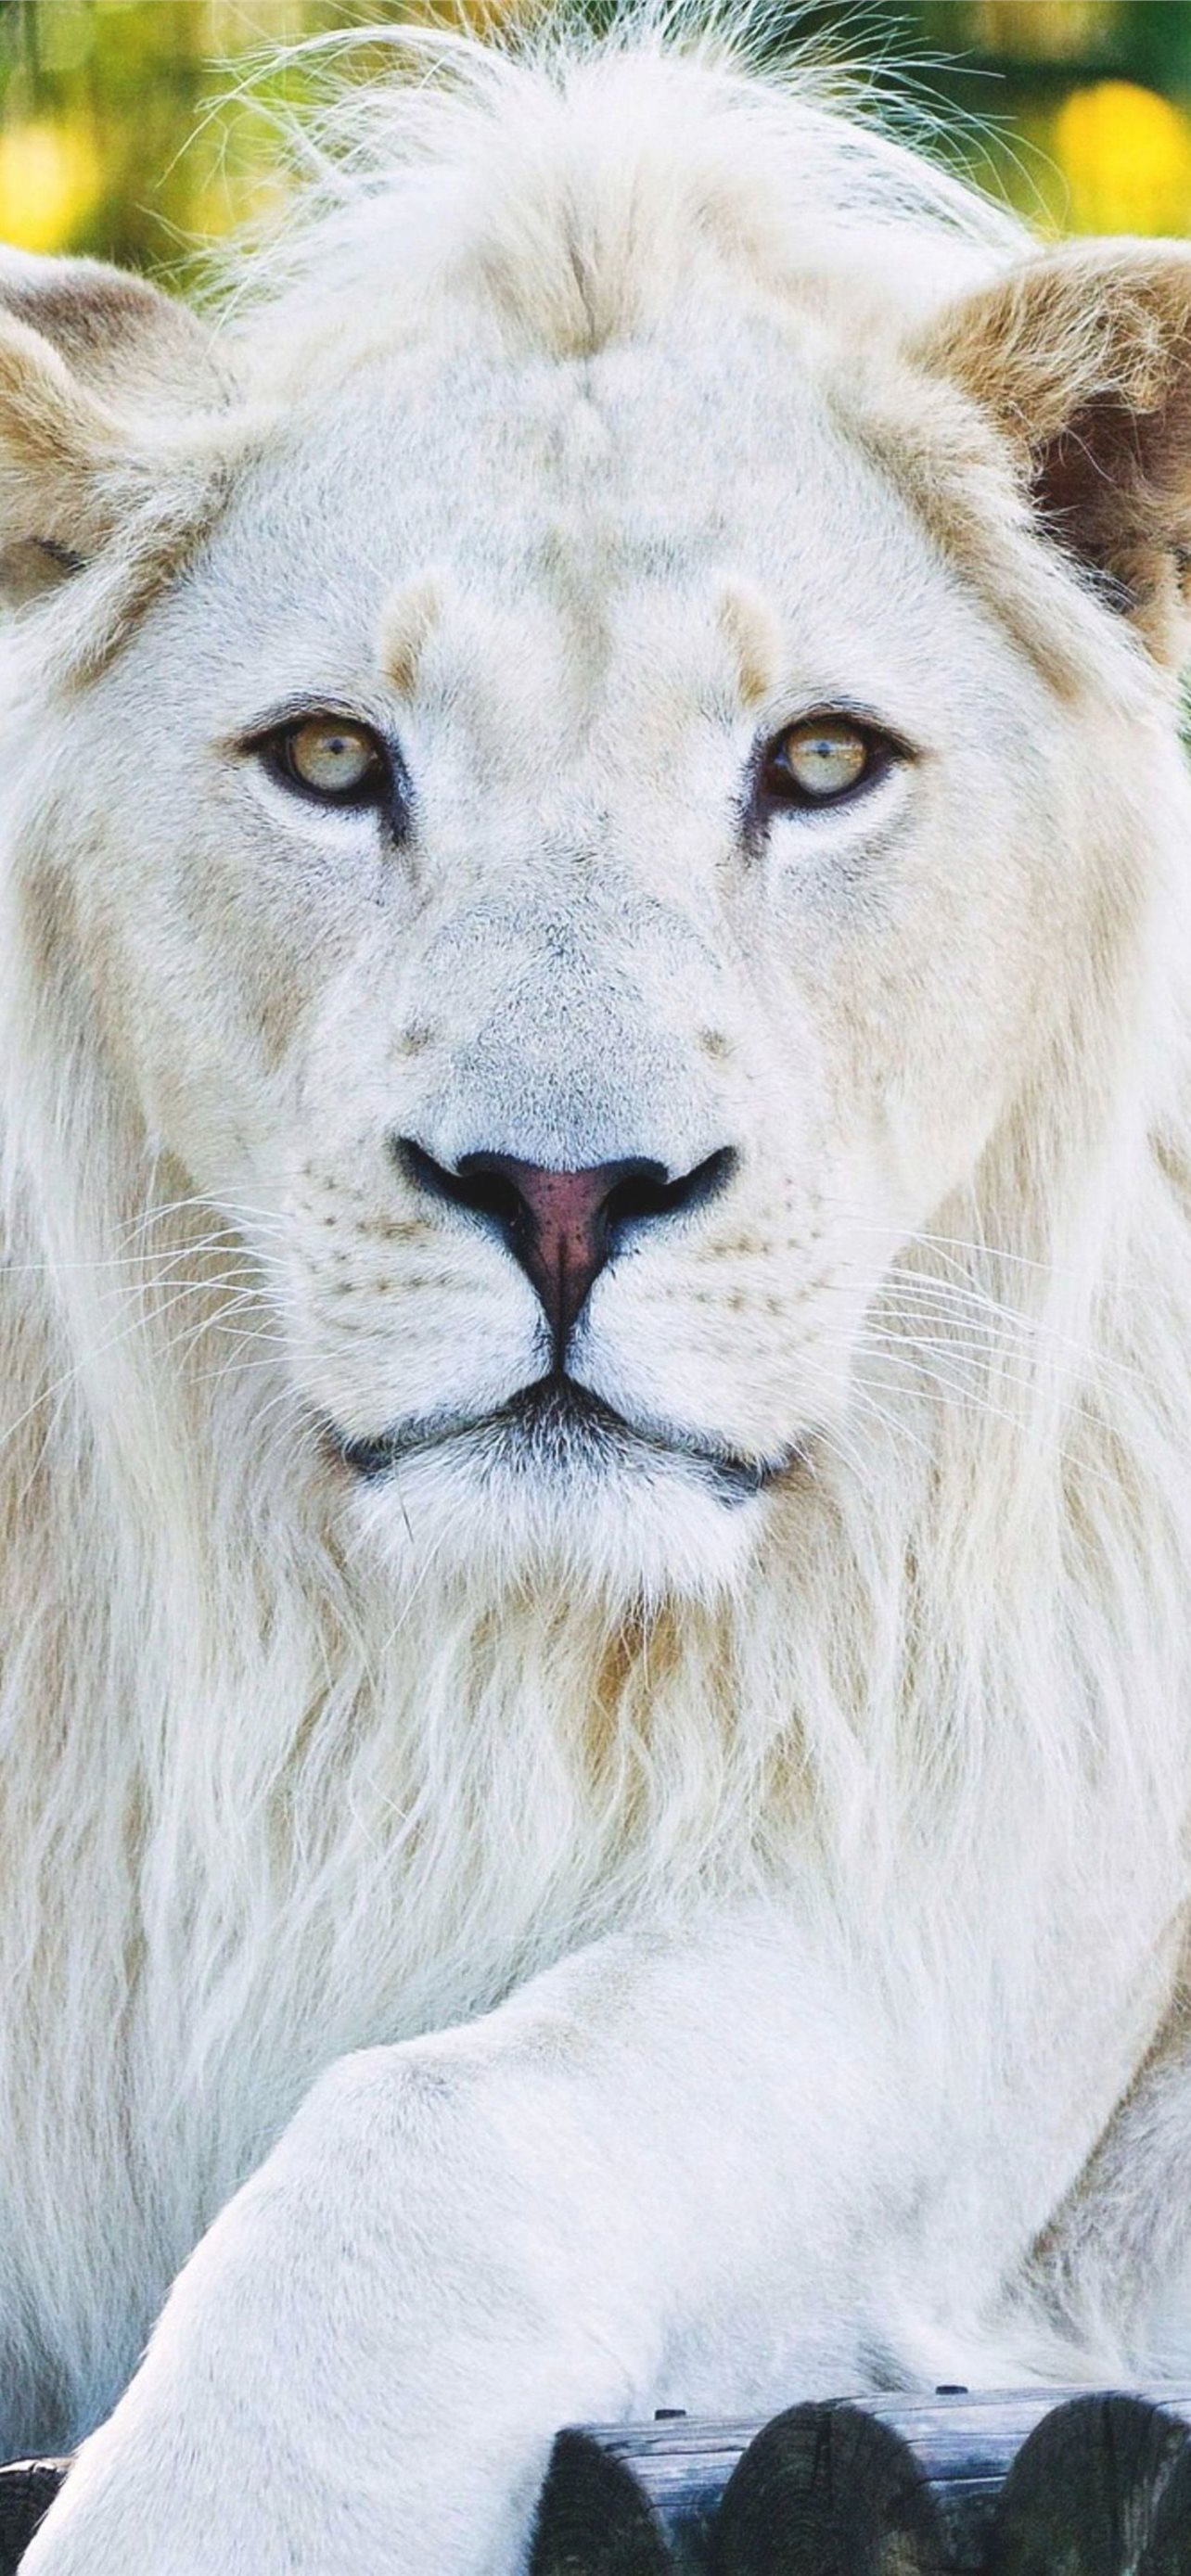 Lion Phone Wallpaper - Mobile Abyss